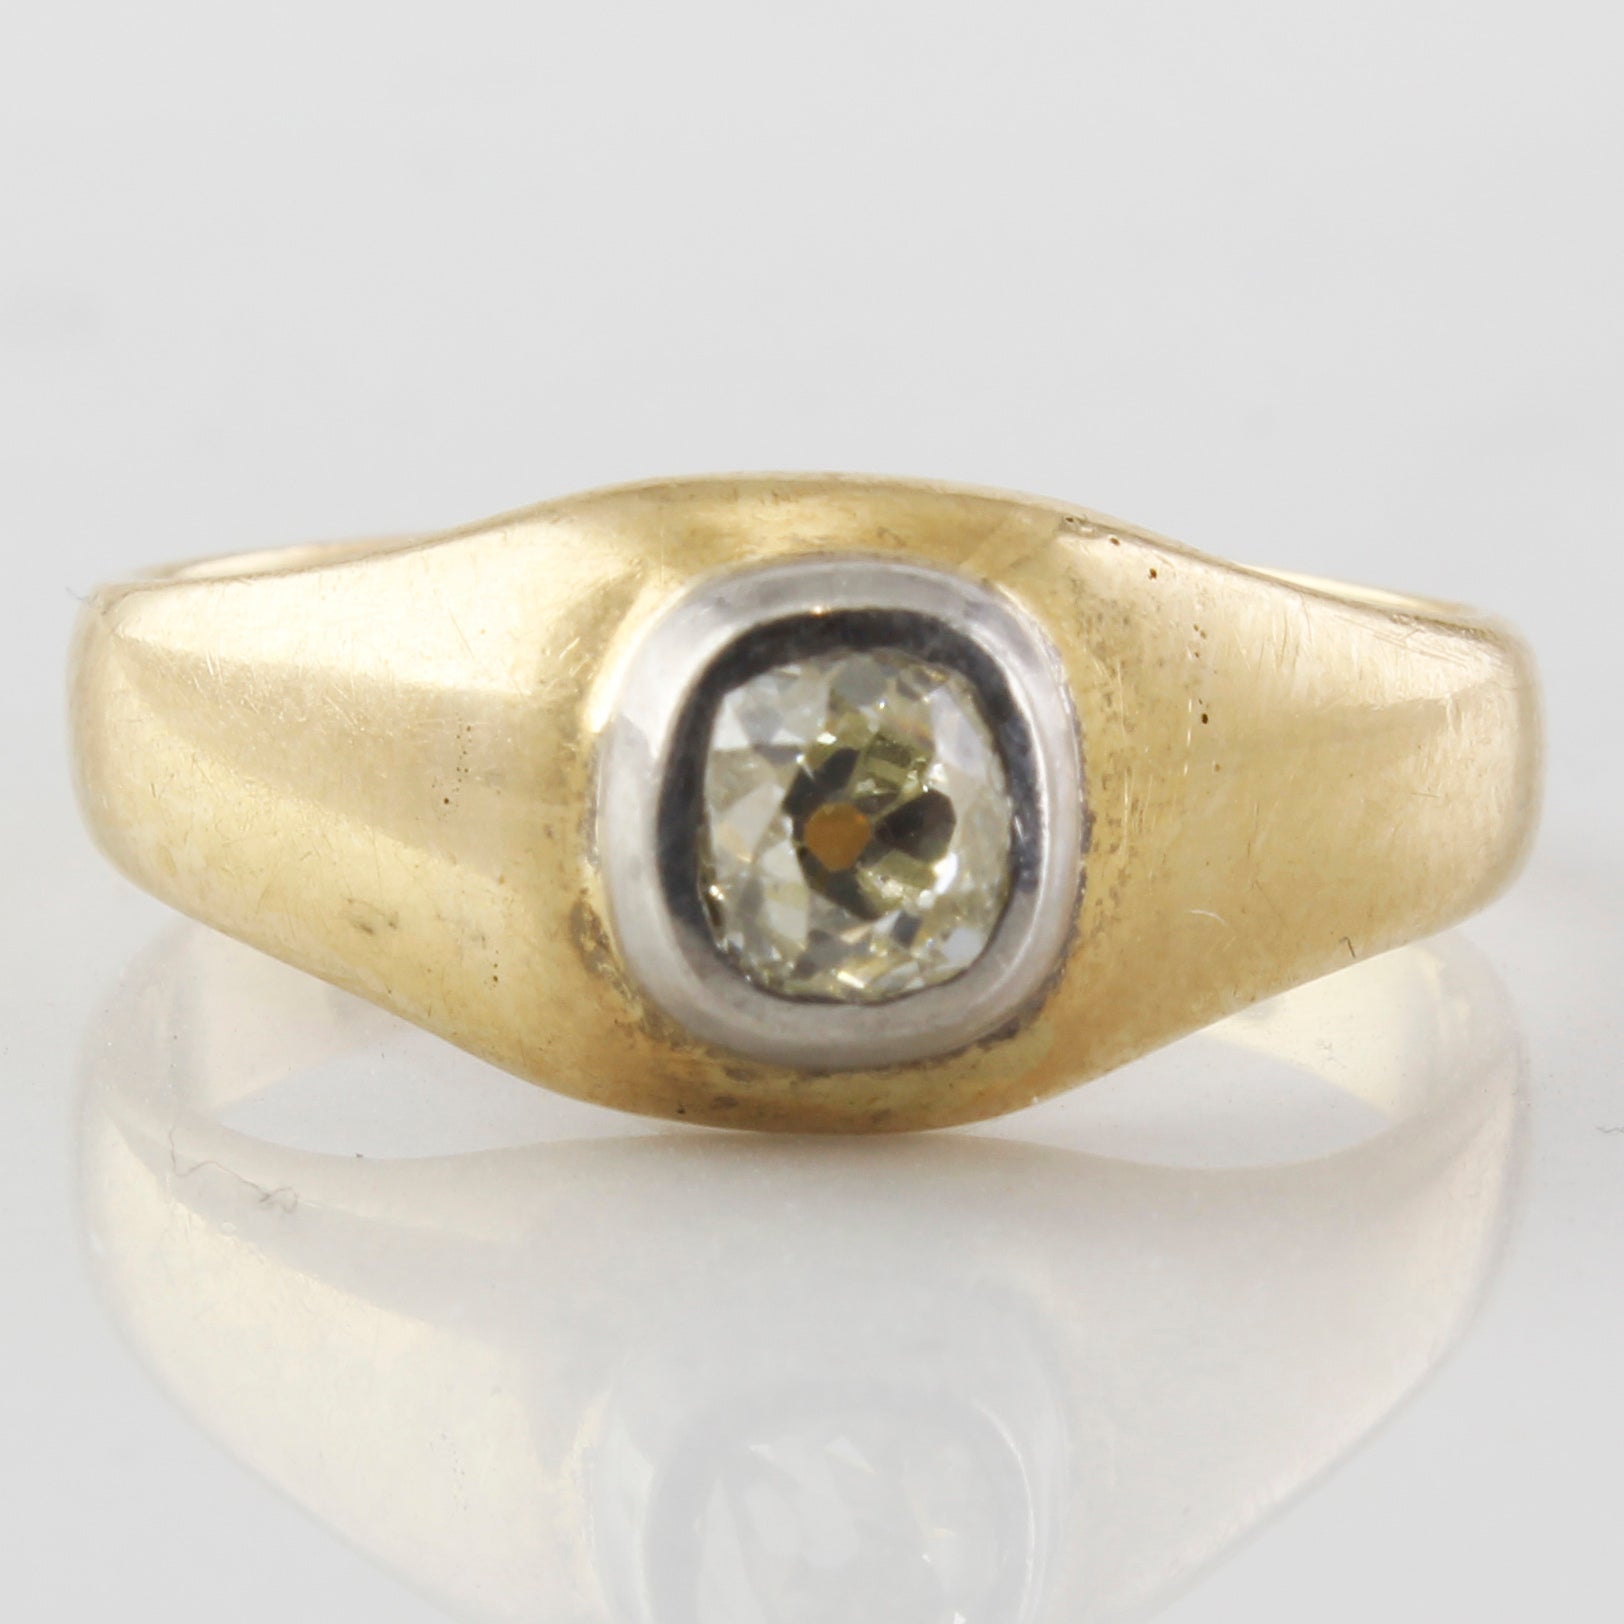 Old mine cut diamond solitaire vintage ring, antique ring for sale in Canada